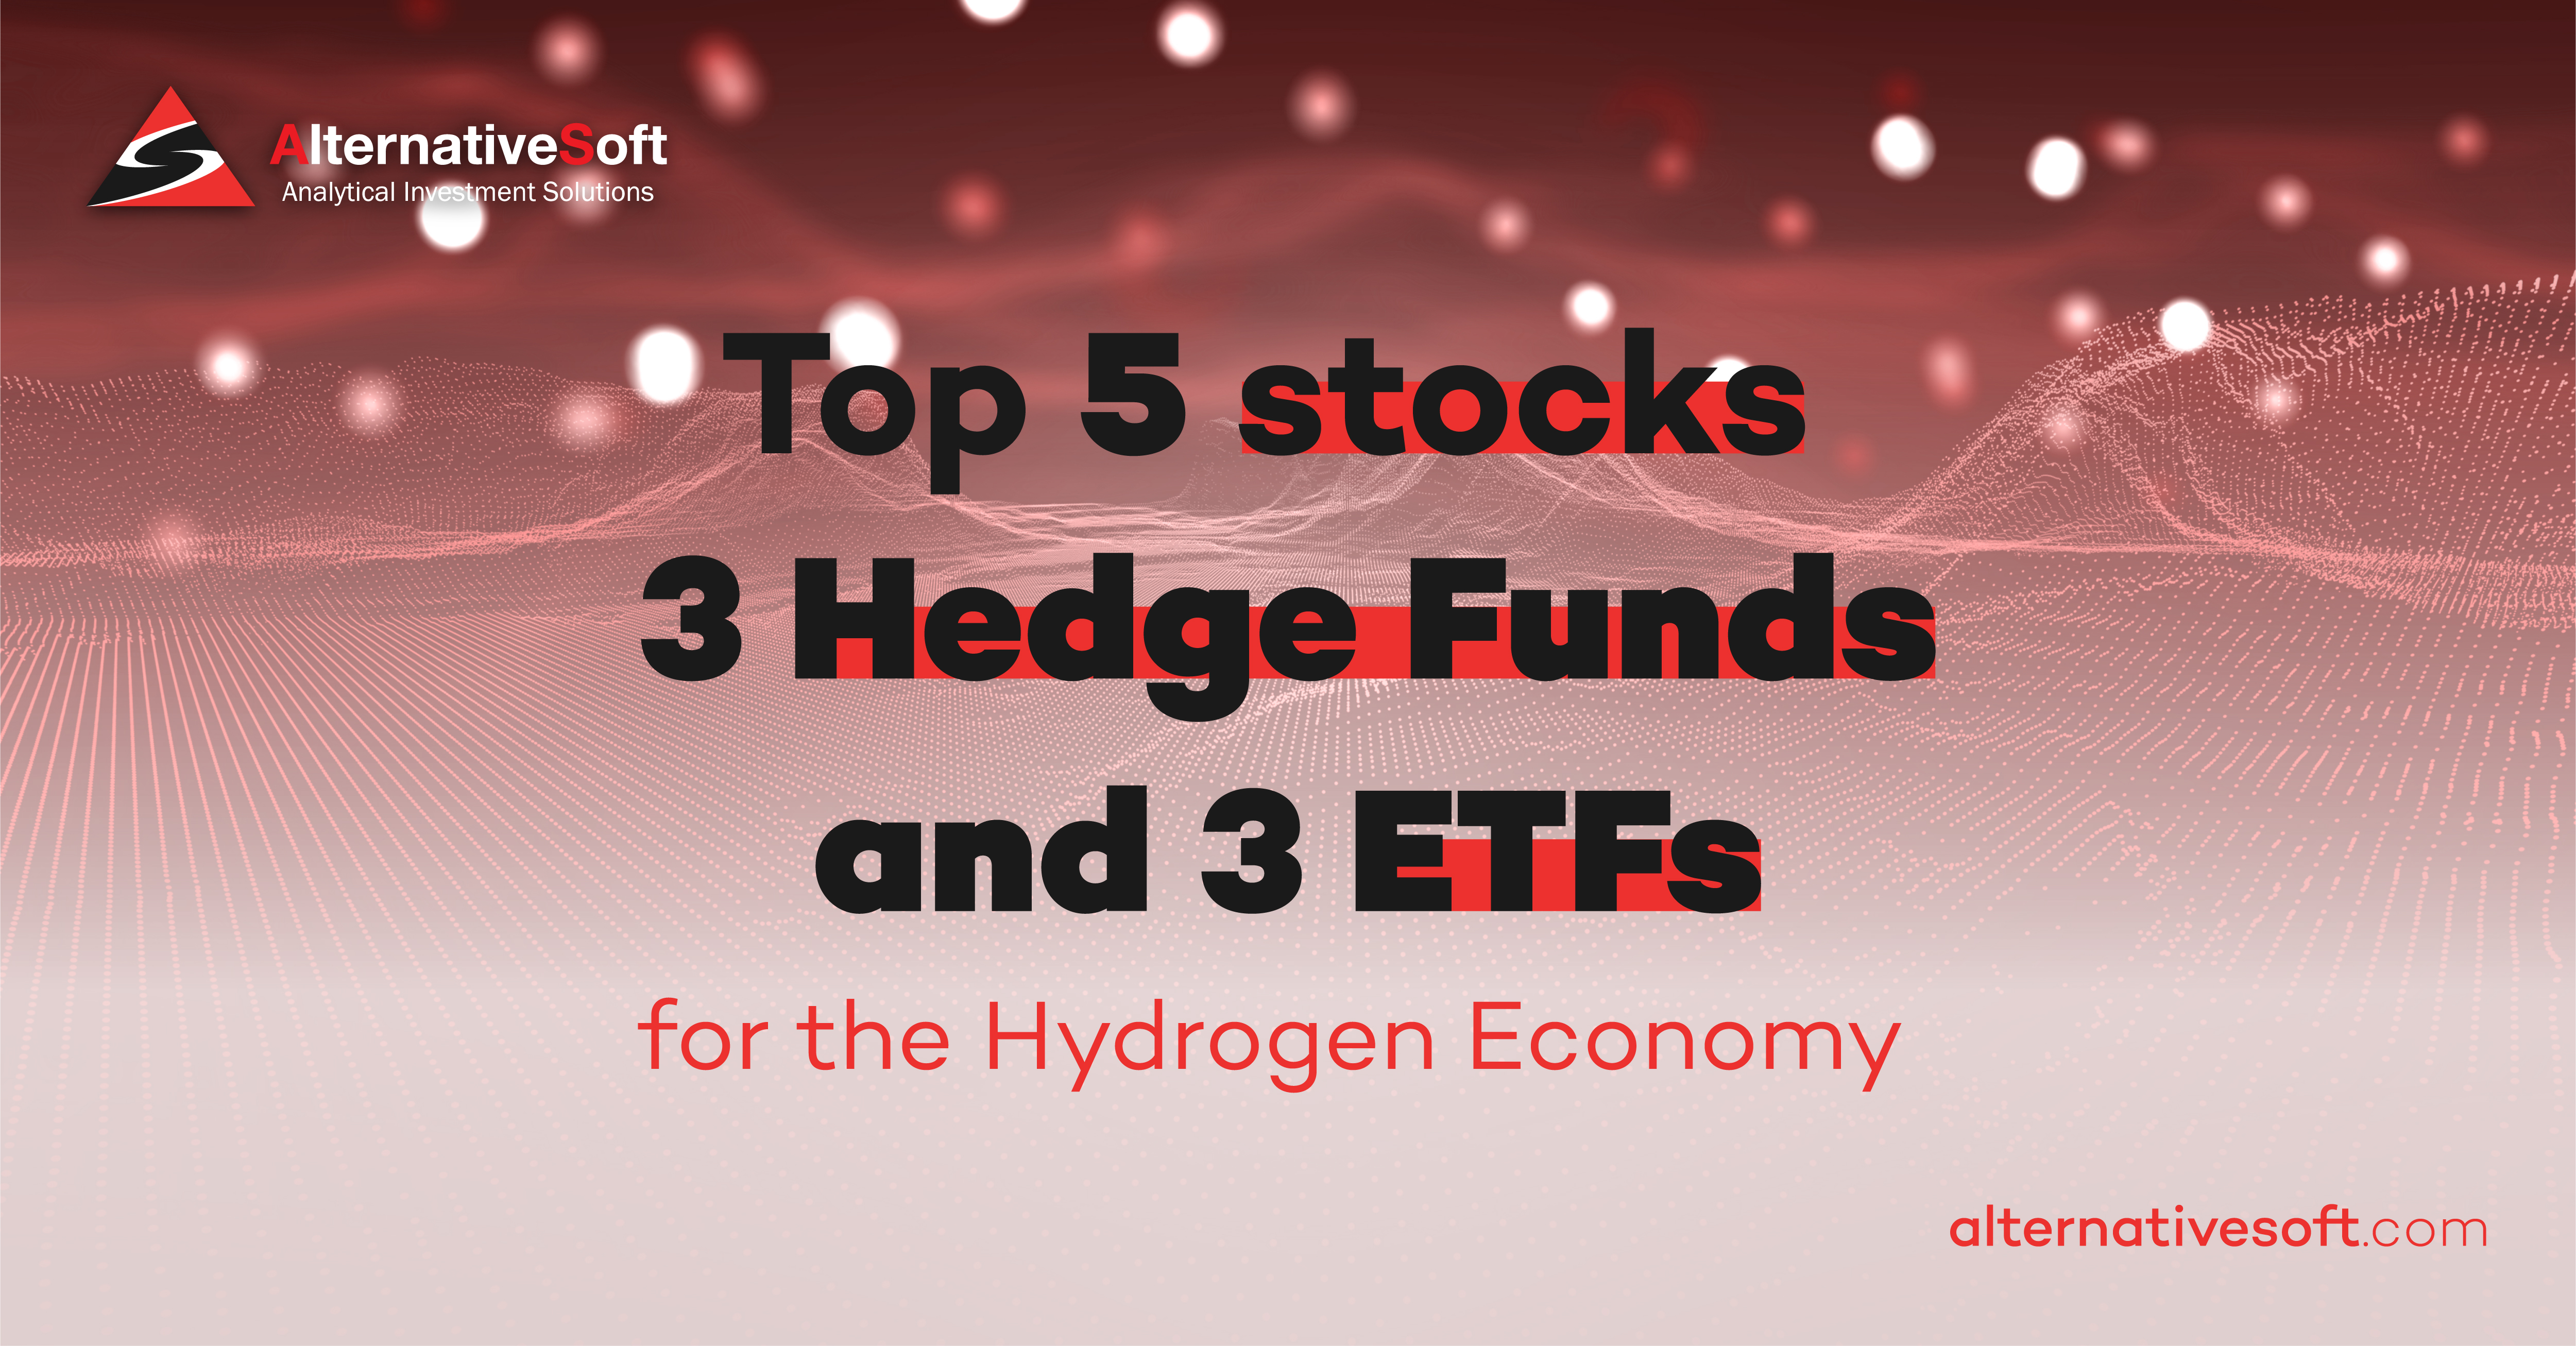 Top 5 stocks, 3 Hedge Funds and 3 ETFs for the Hydrogen Economy